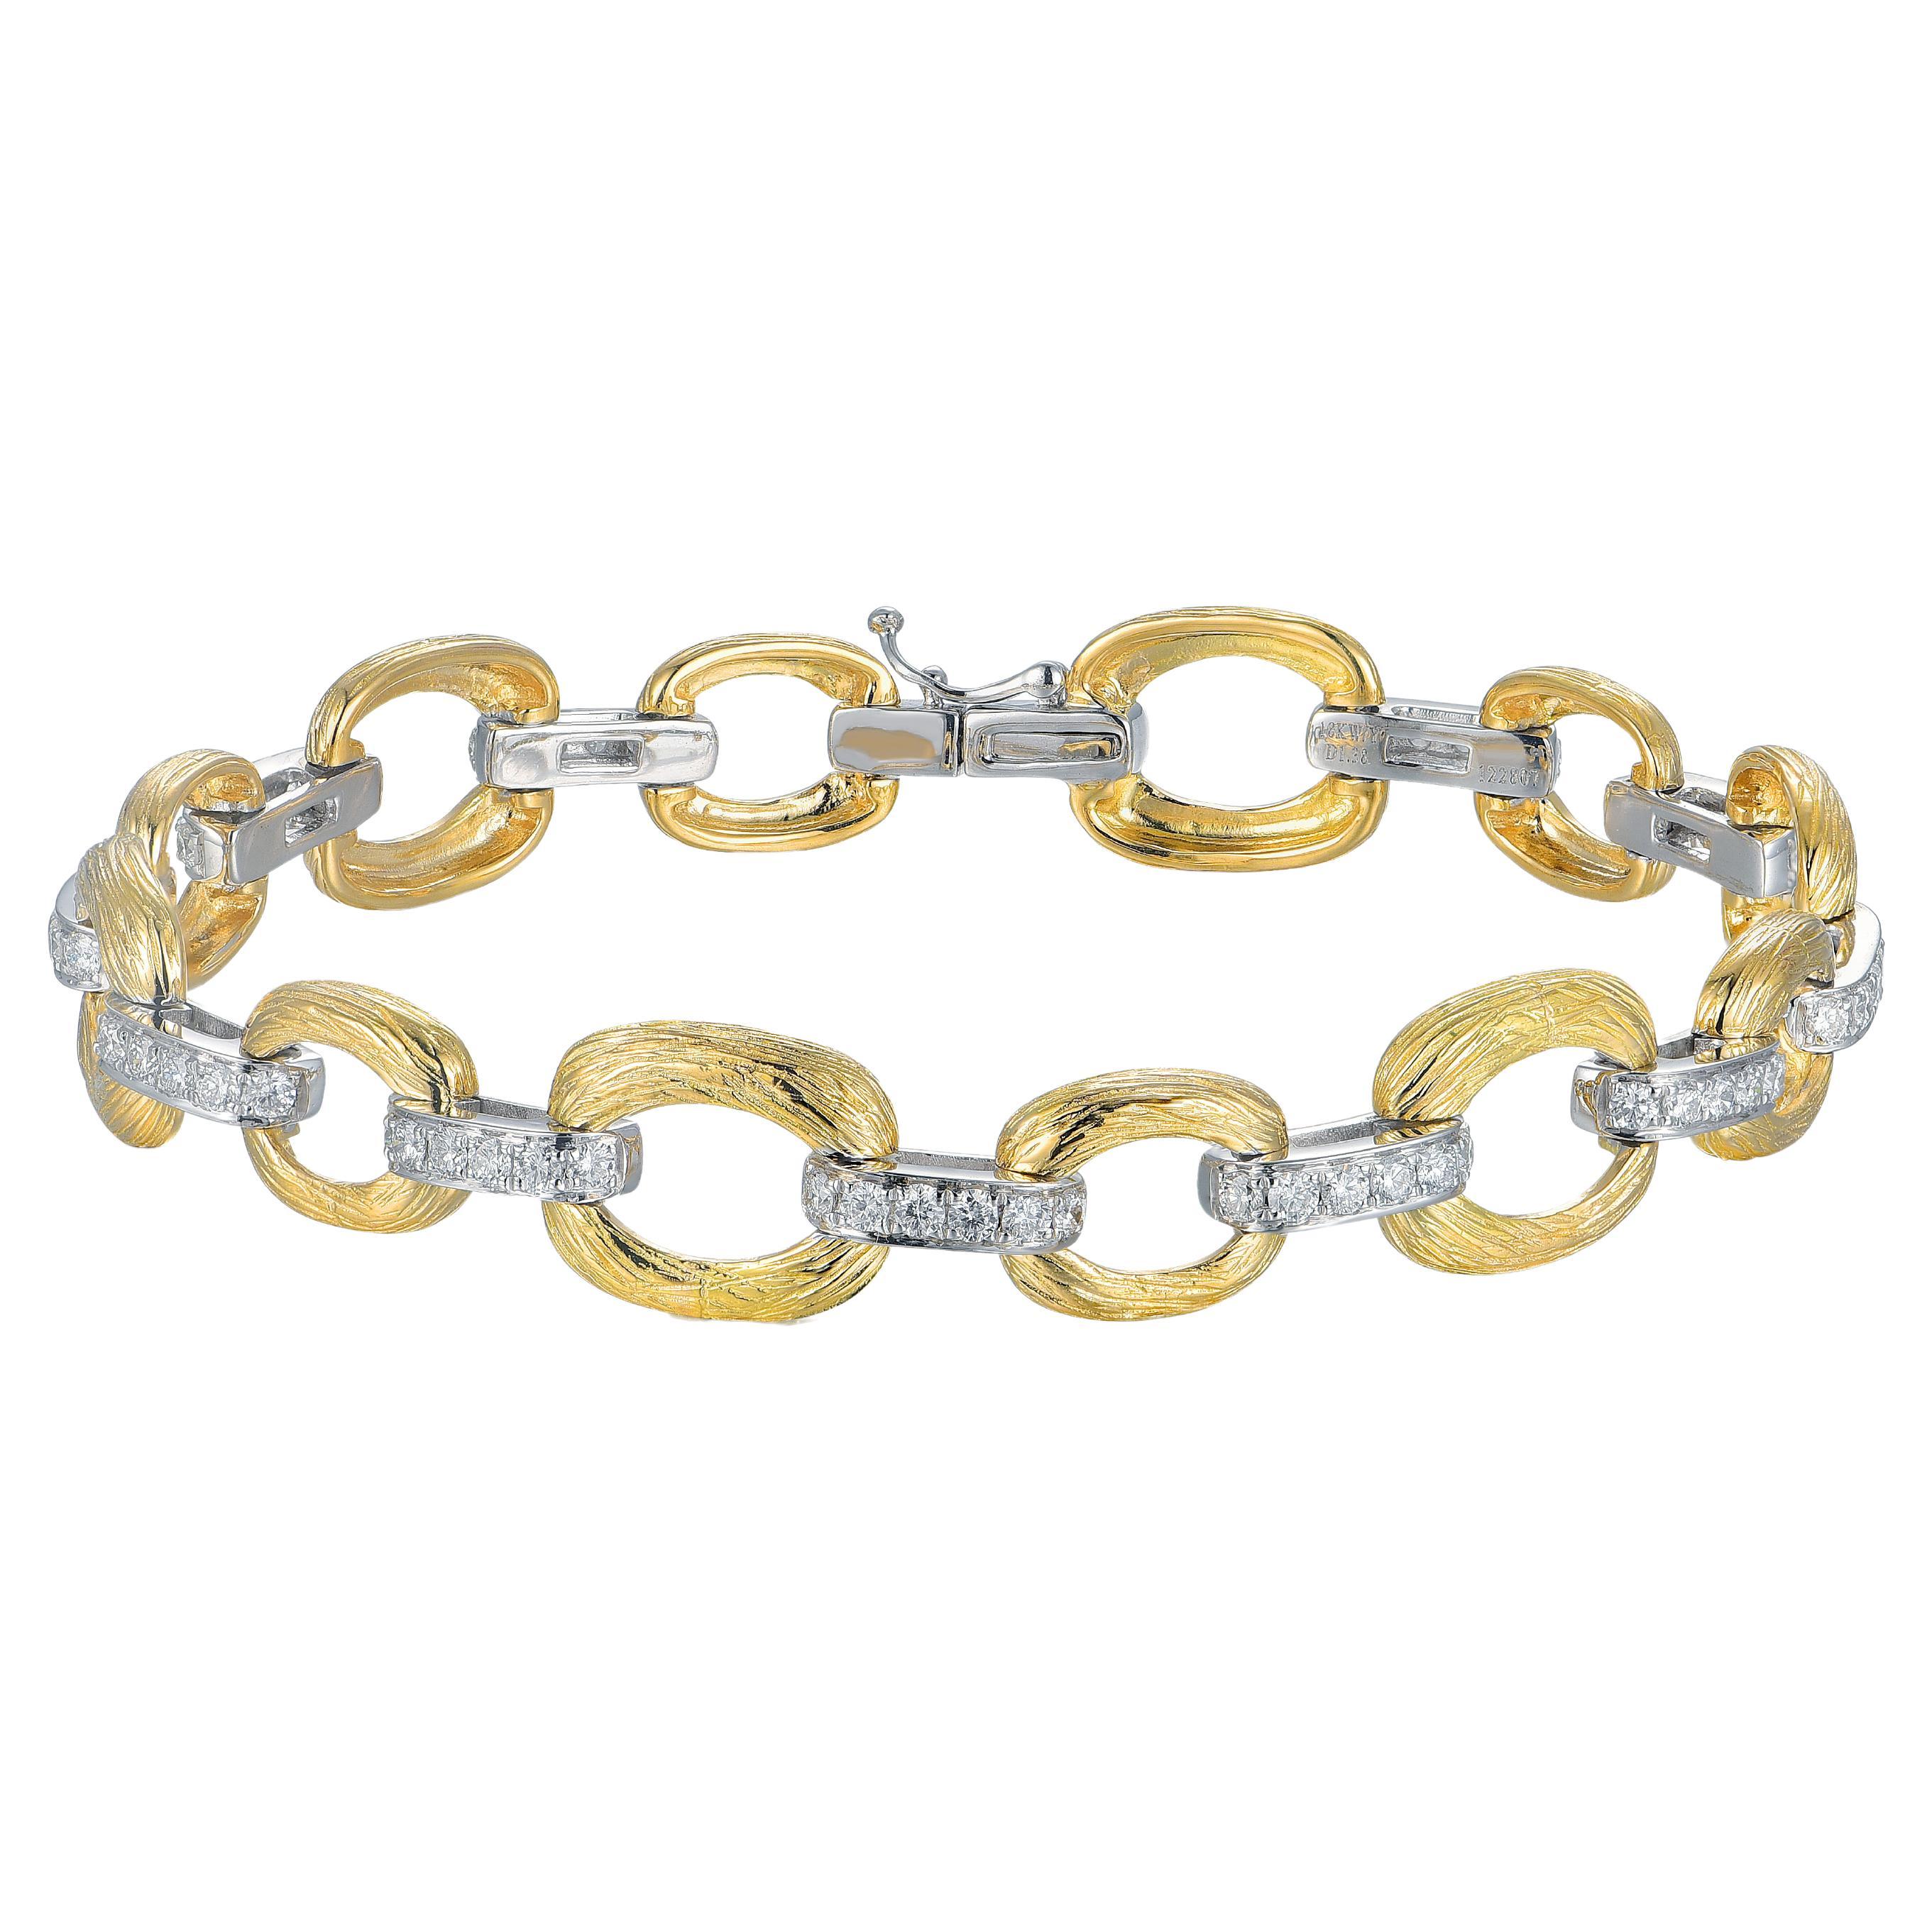 Two Tone Gold and Diamond Link Bracelet